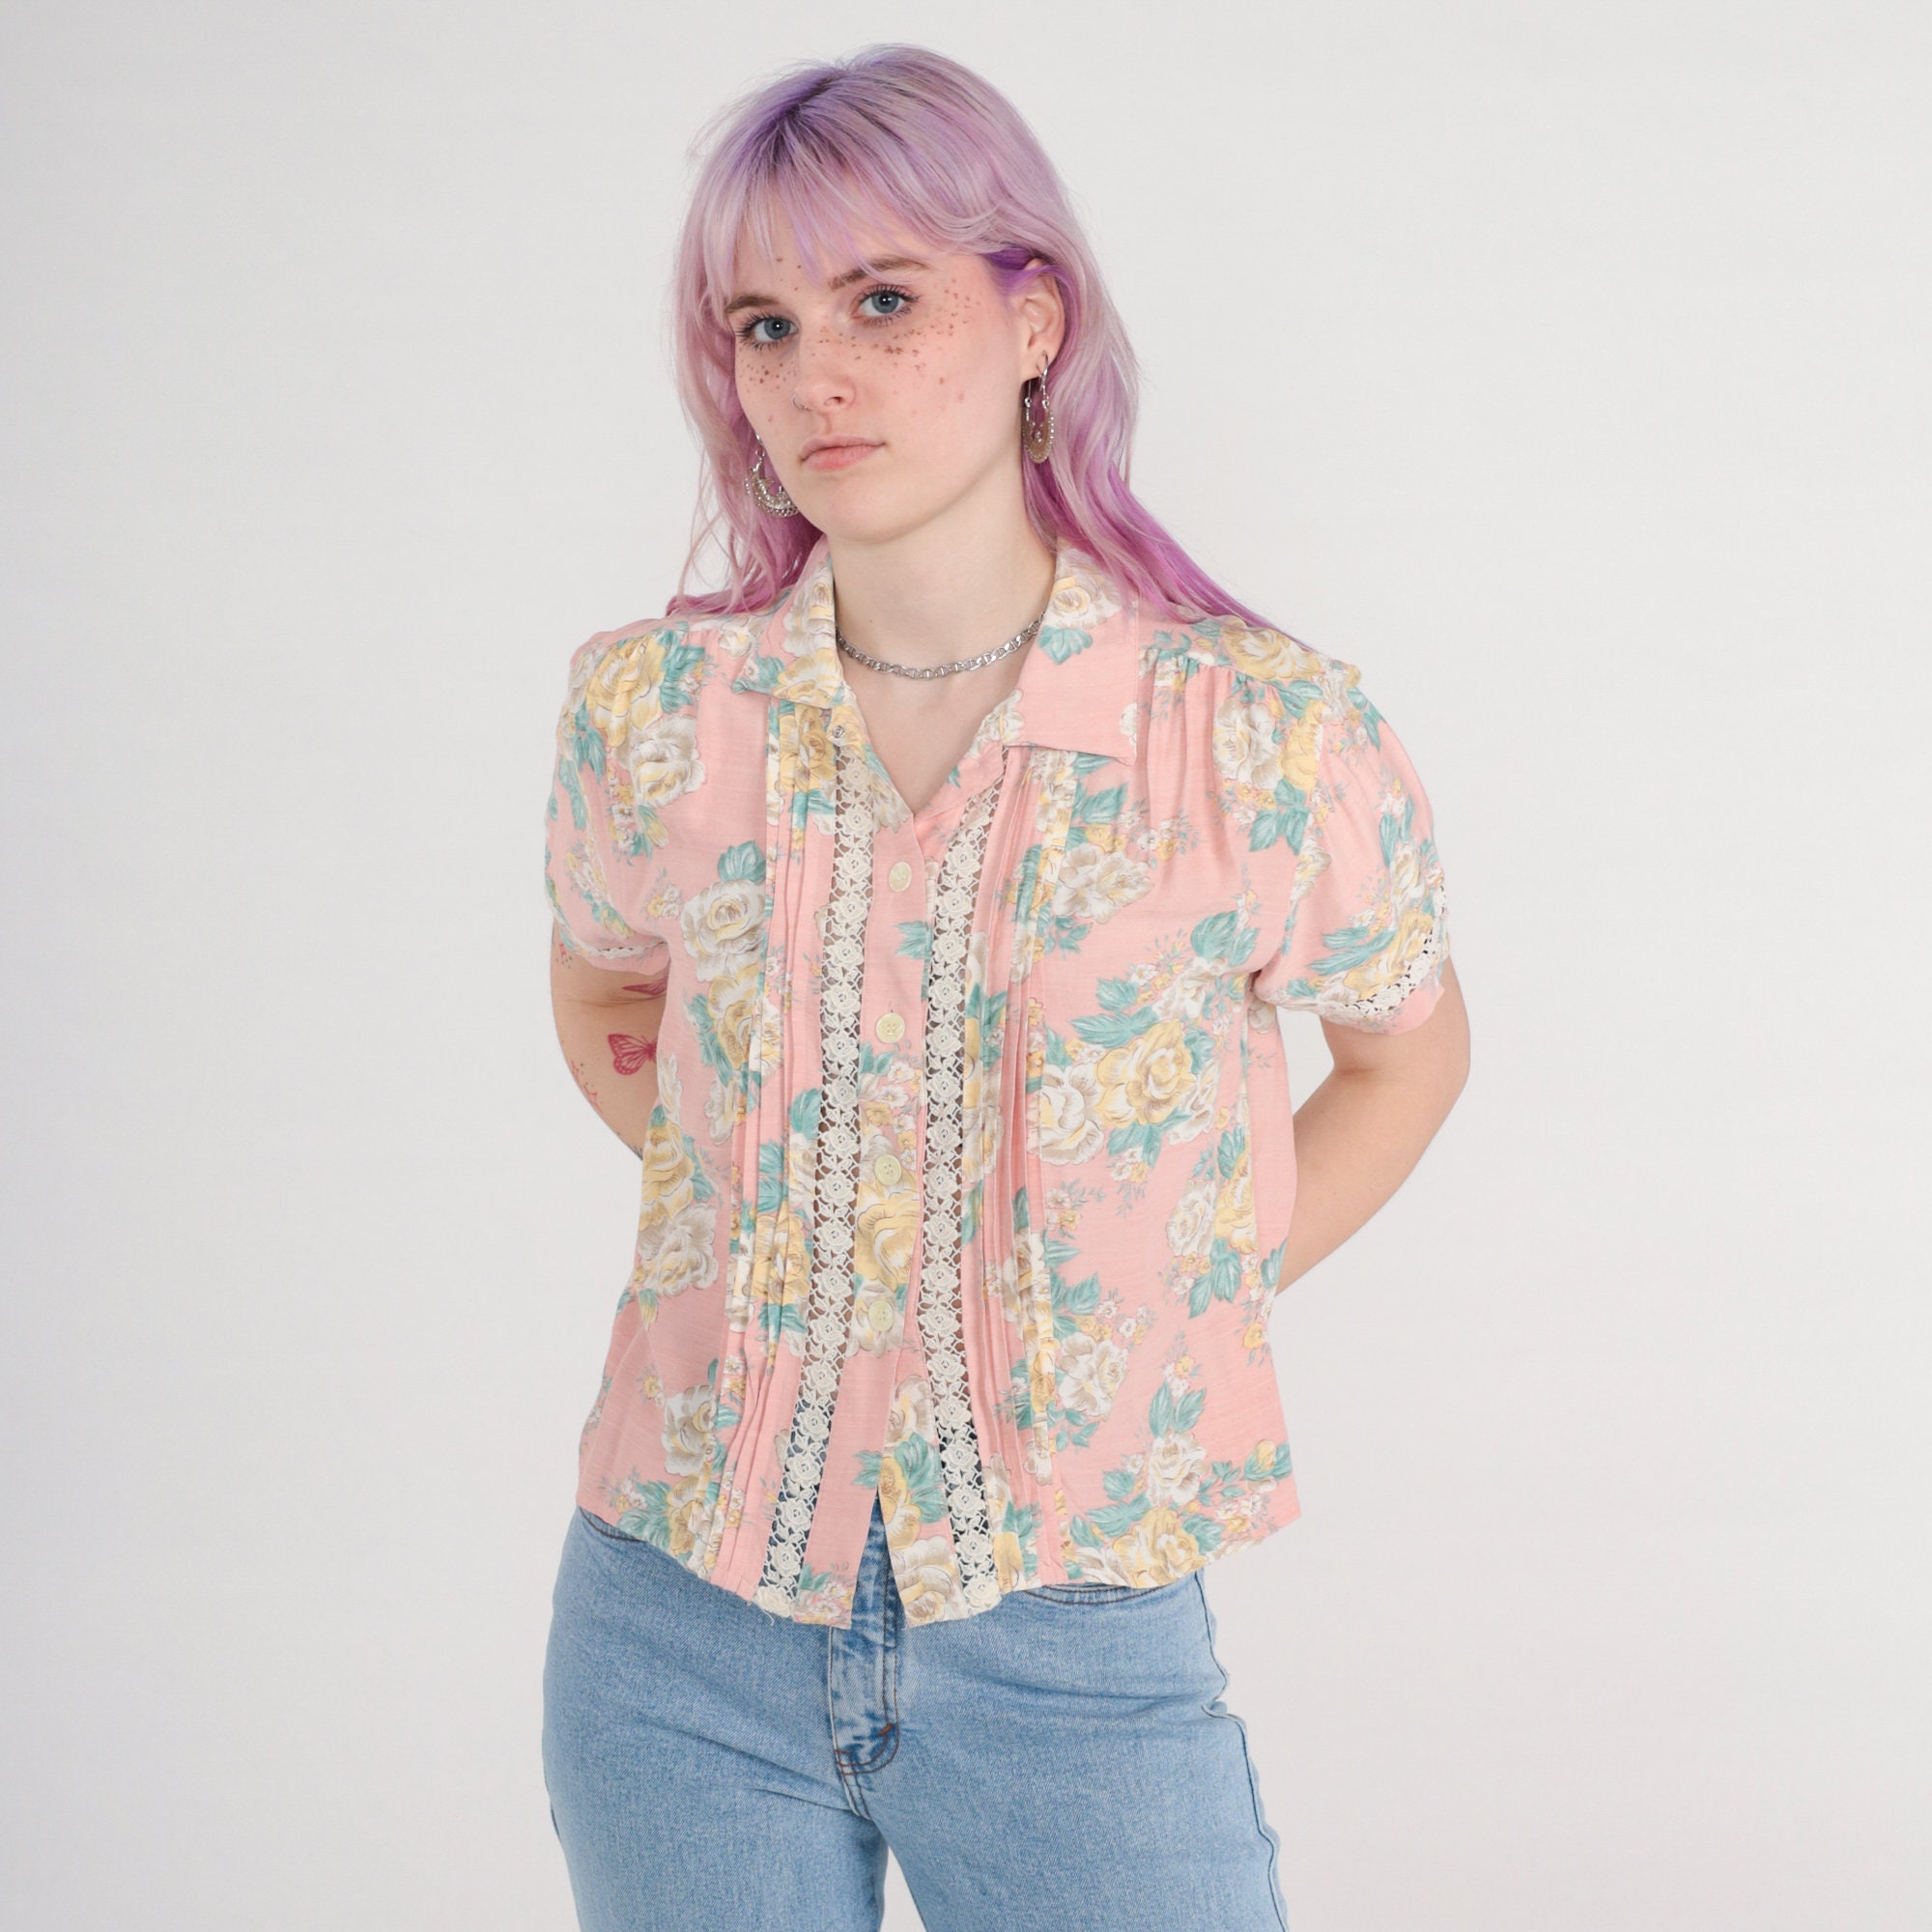 Floral Button Up Blouse 90s Pink Lace Trim Shirt Yellow Flower Print ...